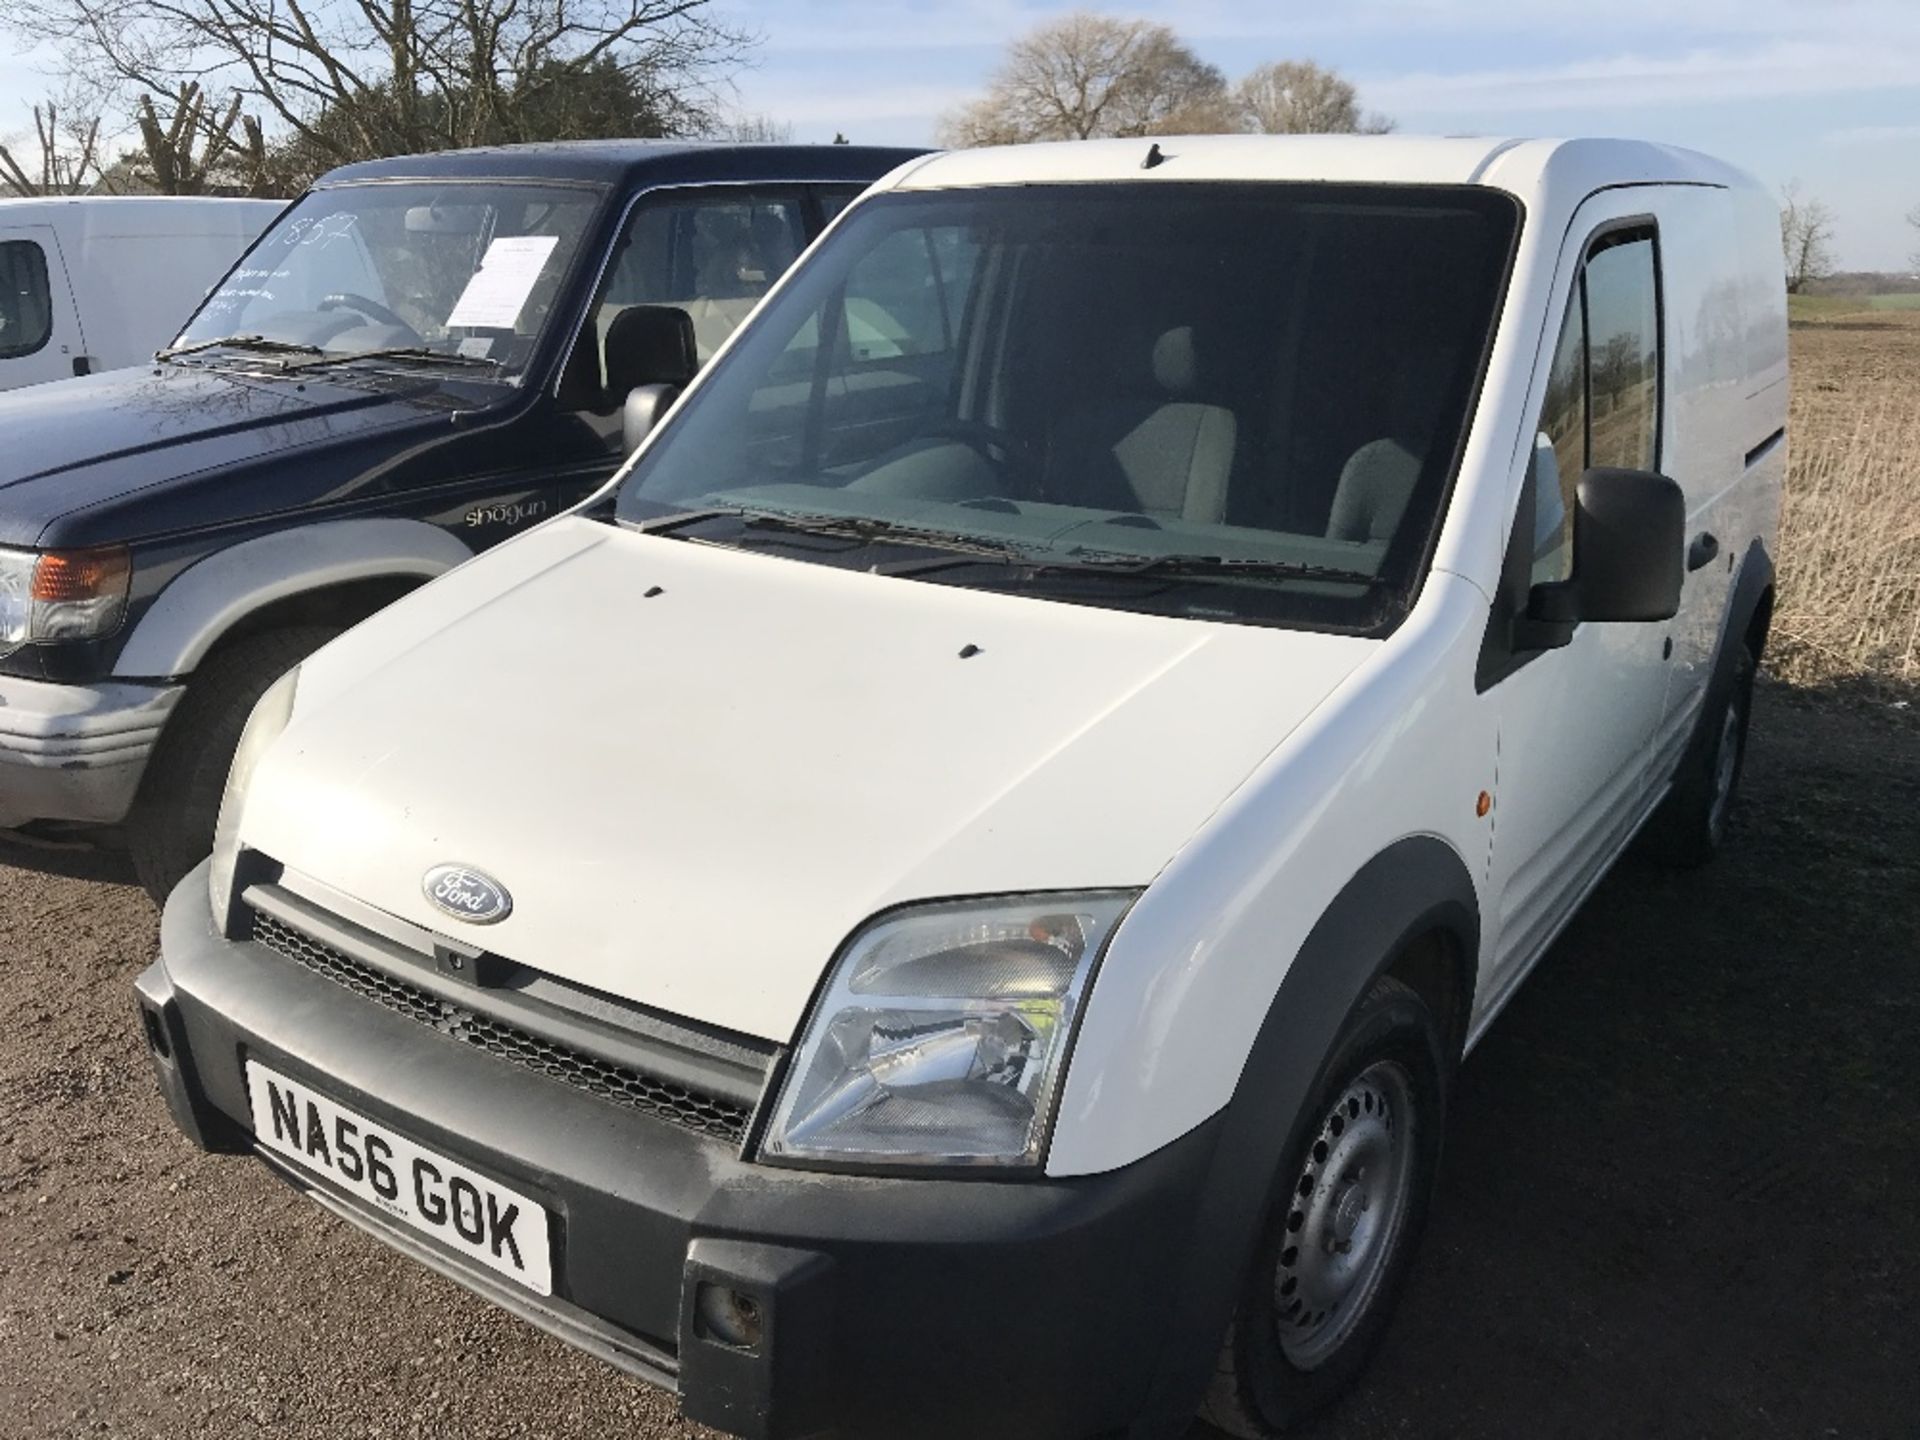 FORD TRANSIT CONNECT PANEL VAN REG:NA56 GOK 100,247 REC MILES WHEN TESTED WAS SEEN TO RUN, DRIVE,